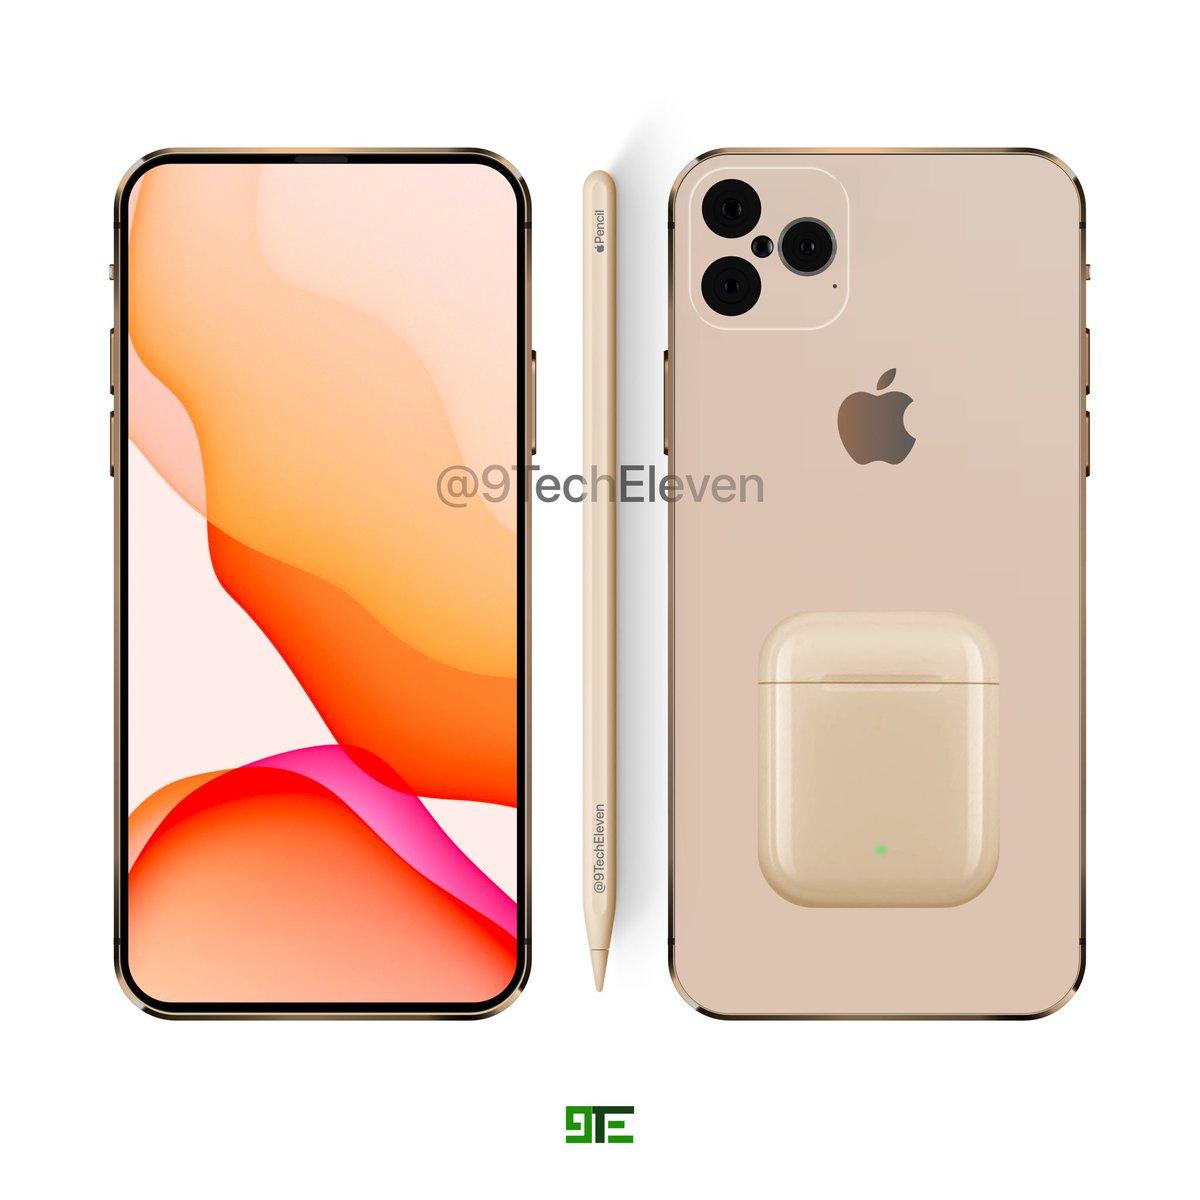 9TechEleven - #iPhone 2020 is rumored to have a